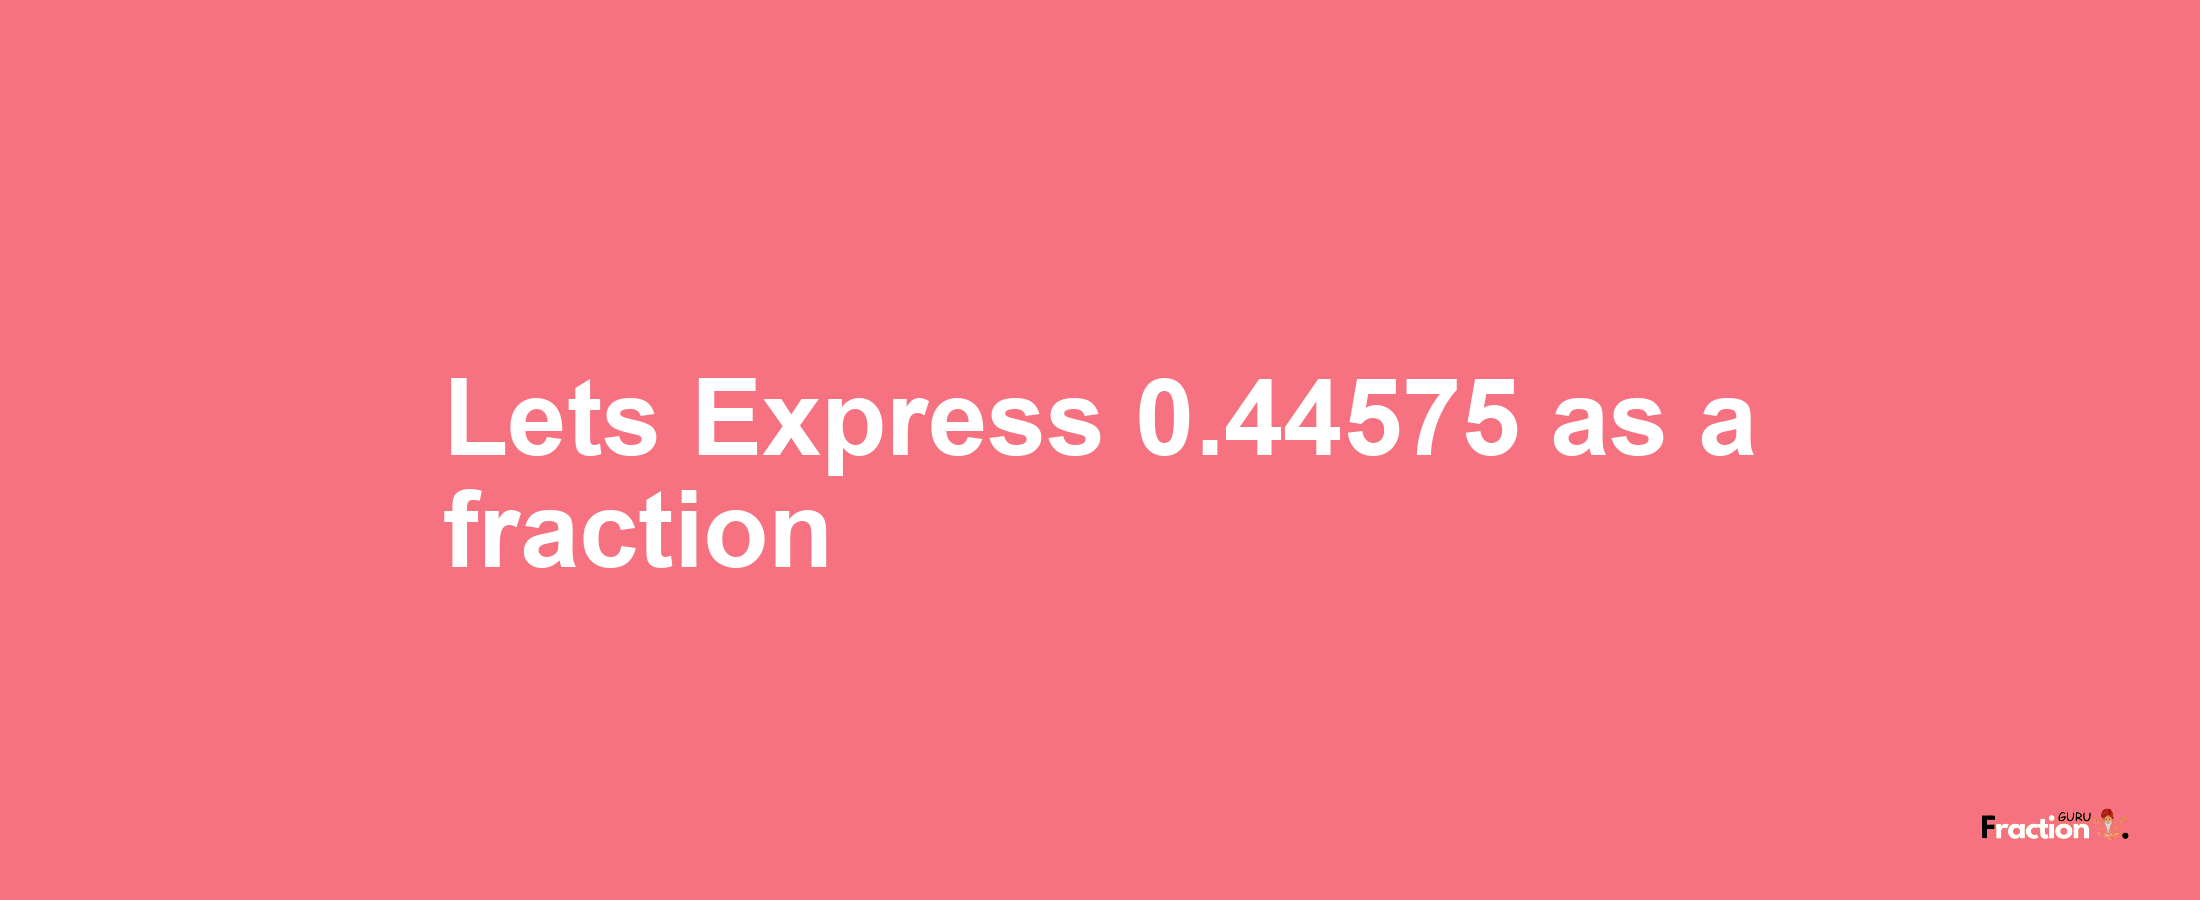 Lets Express 0.44575 as afraction